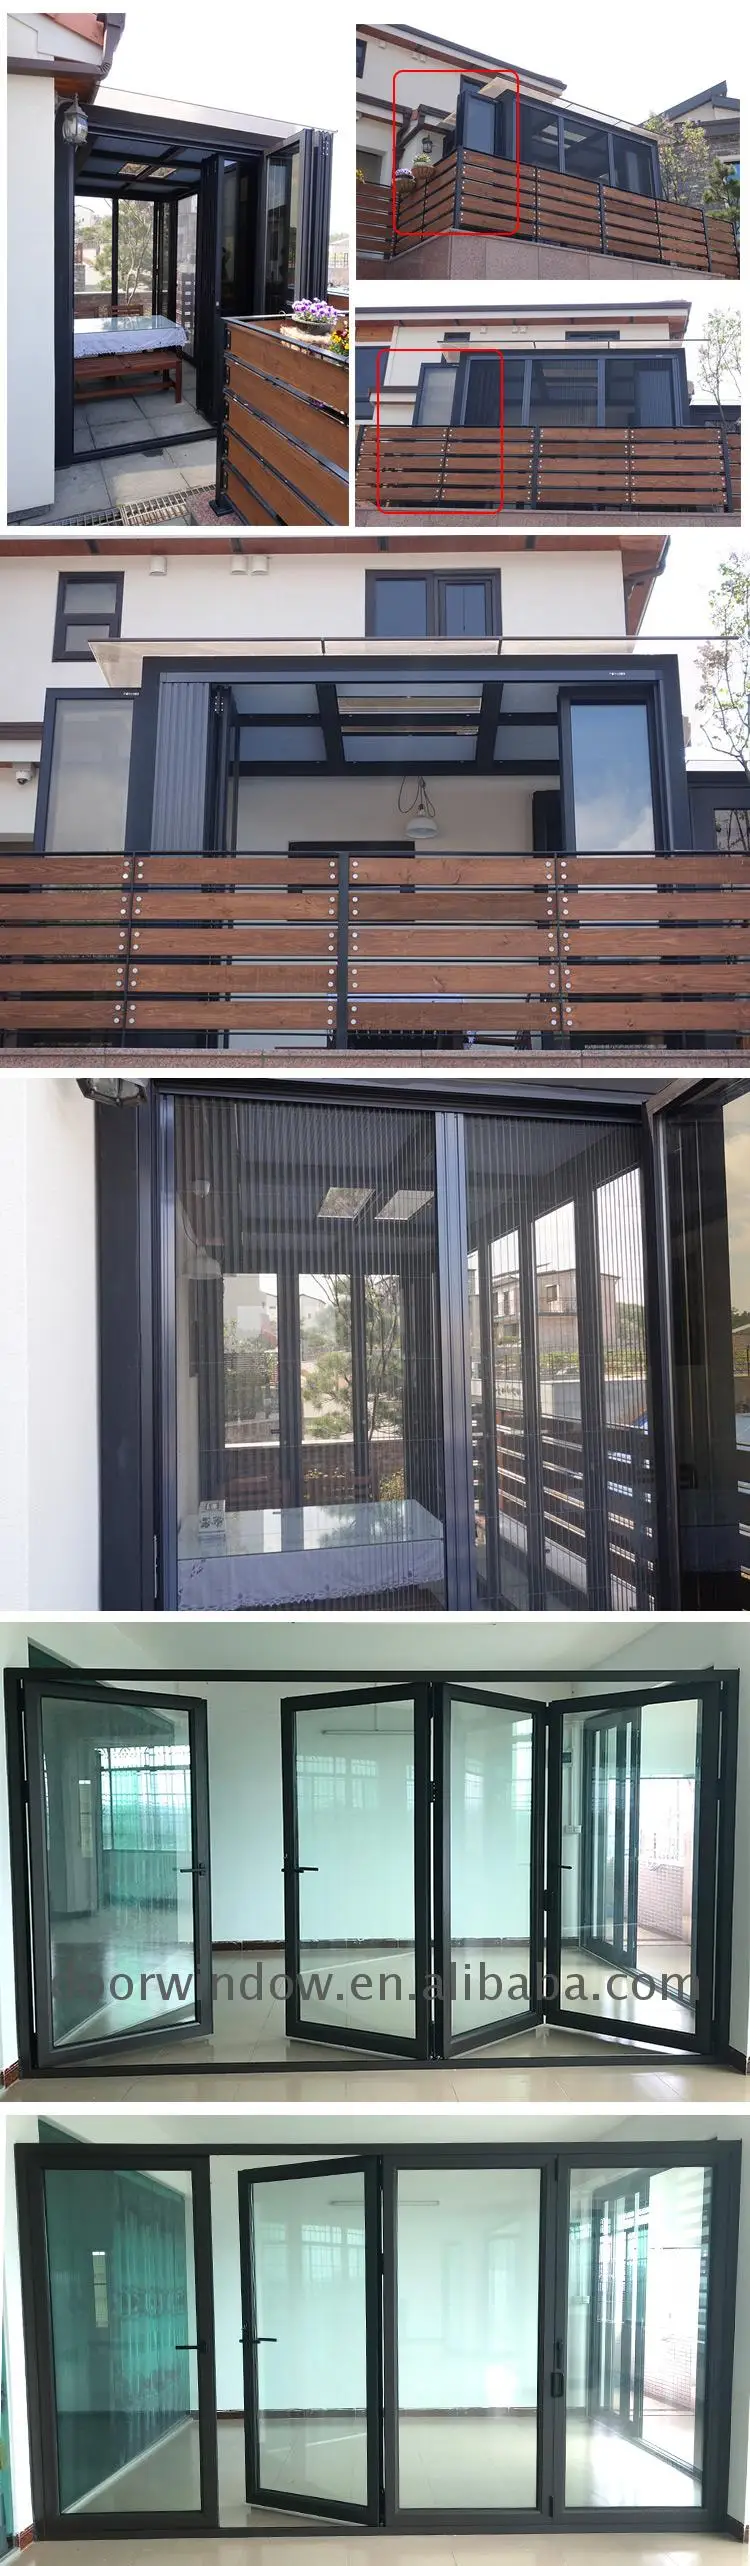 New style special order bifold doors soundproof internal